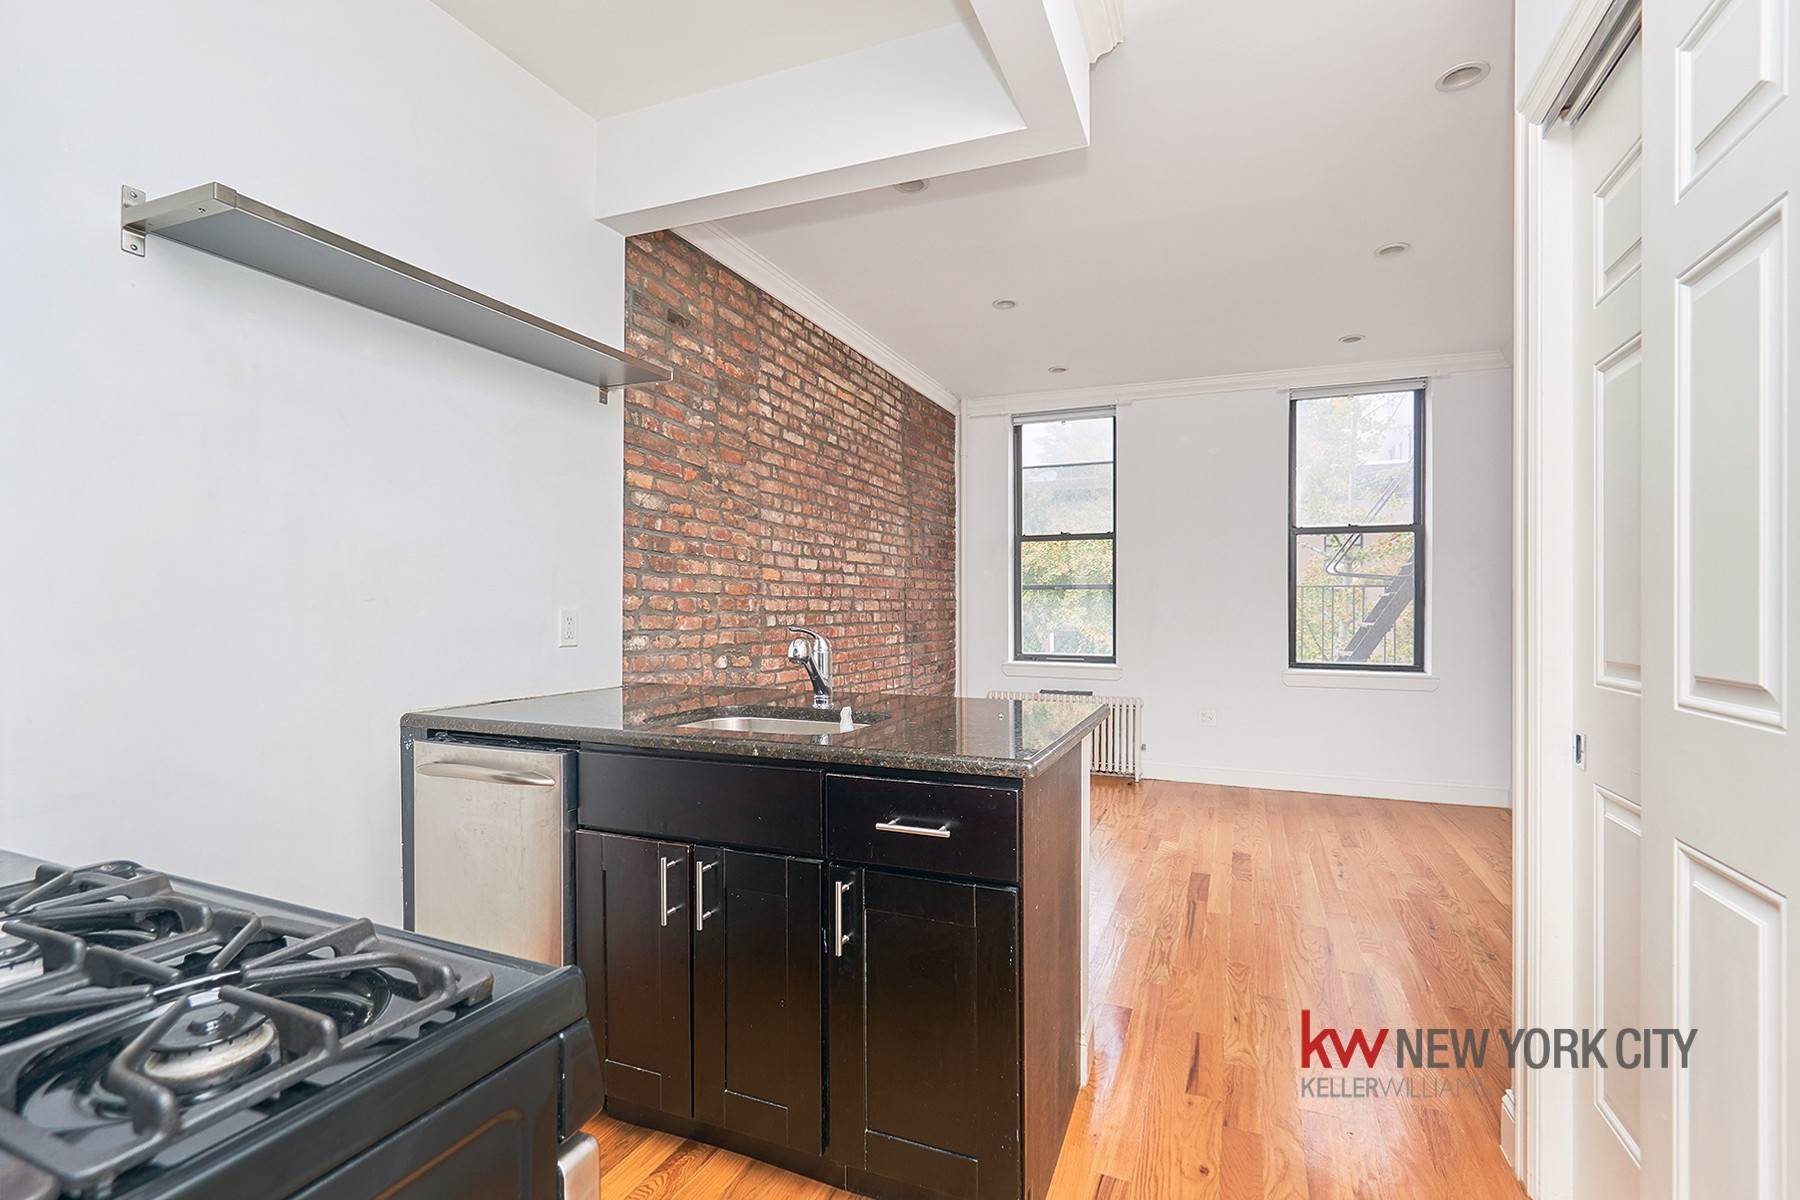 This is the ONLY available 1 bedroom unit in the ENTIRE Boerum Hill area with WASHER DRYER in unit under 3, 000.